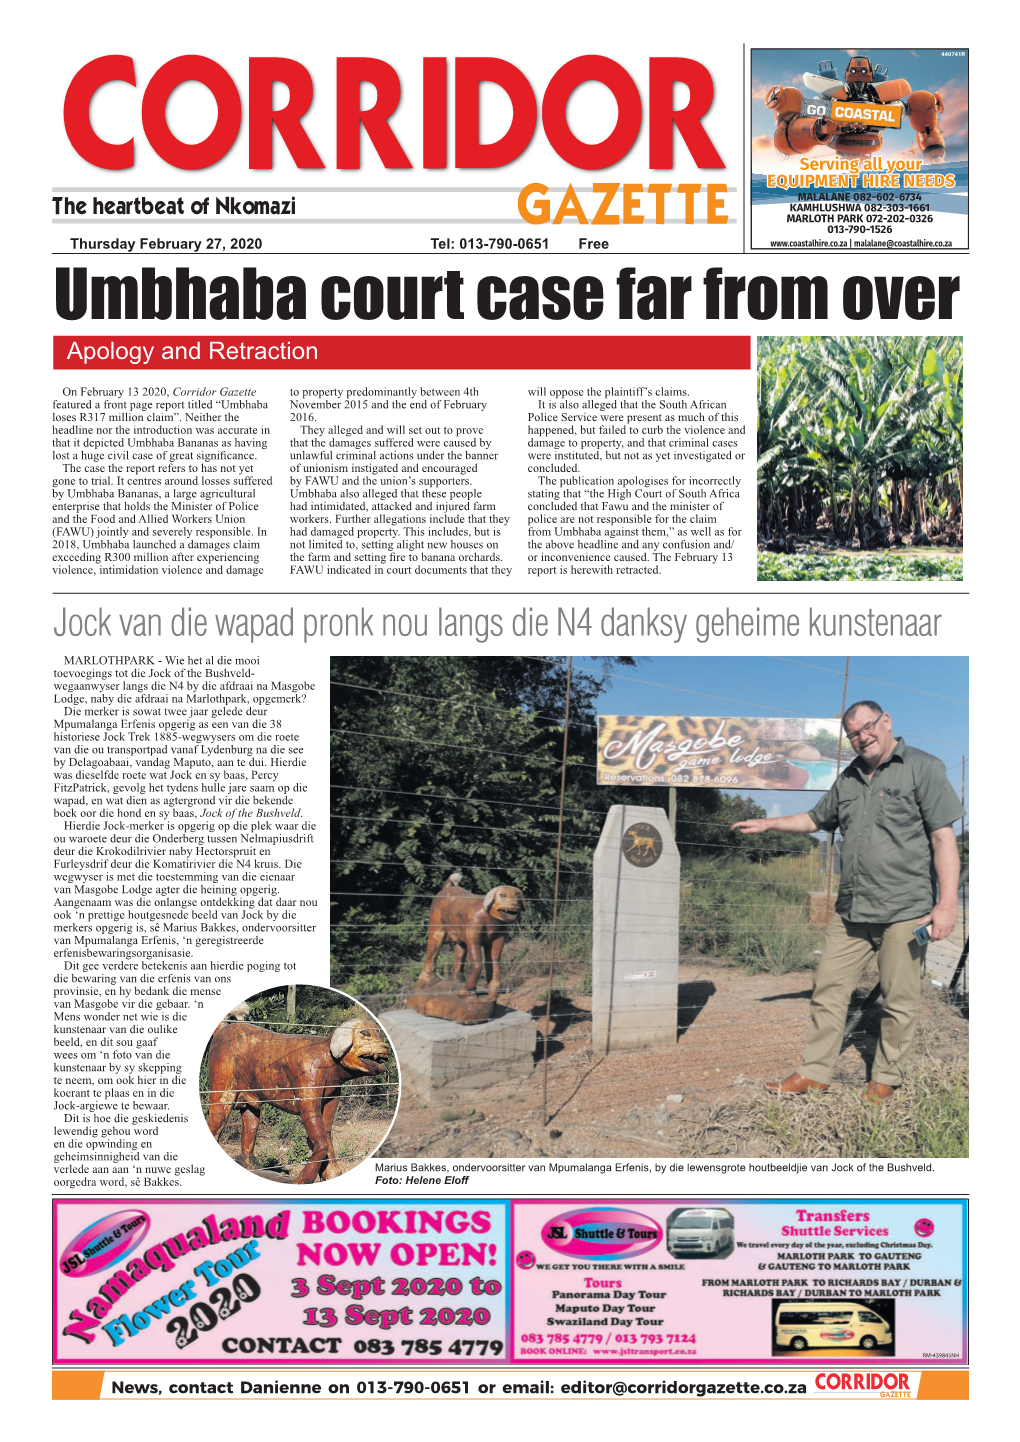 Umbhaba Court Case Far from Over Apology and Retraction